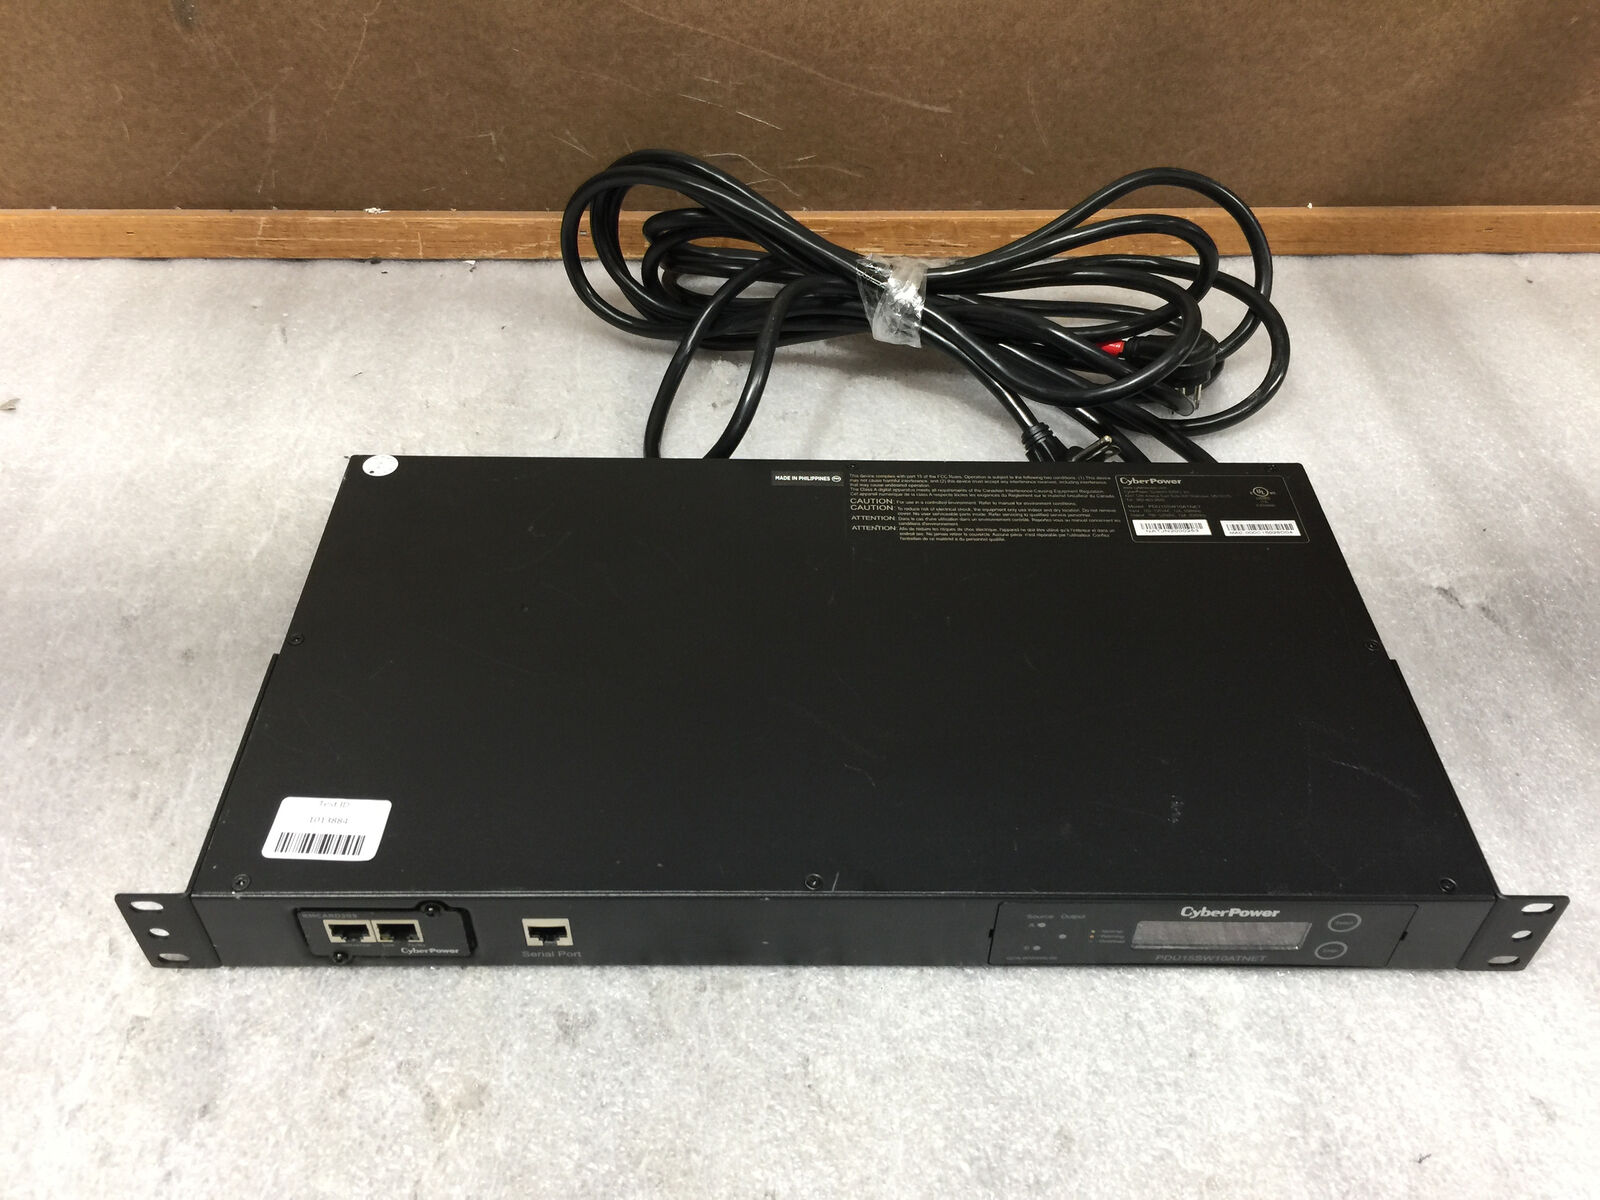 CyberPower PDU15SW10ATNET 10 Outlet Power Distribution Unit 12A 100-120VAC